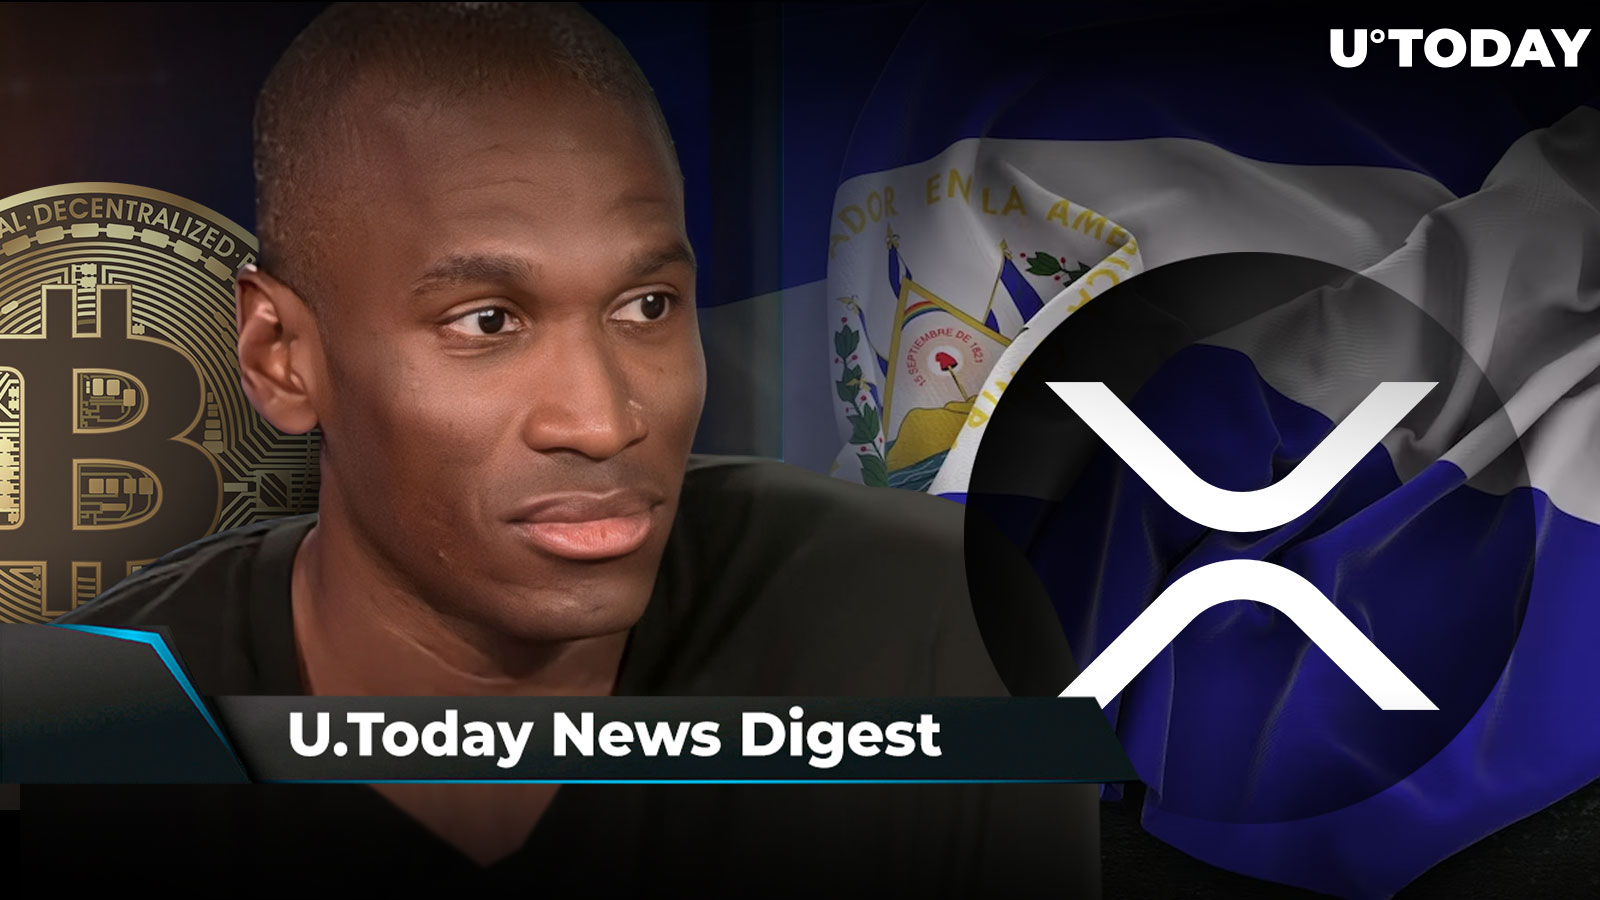 SHIB Big Announcement Imminent, Arthur Hayes Shares Epic Bitcoin Prediction, Former Ripple Director Urges El Salvador to Switch to XRP: Crypto News Digest by U.Today